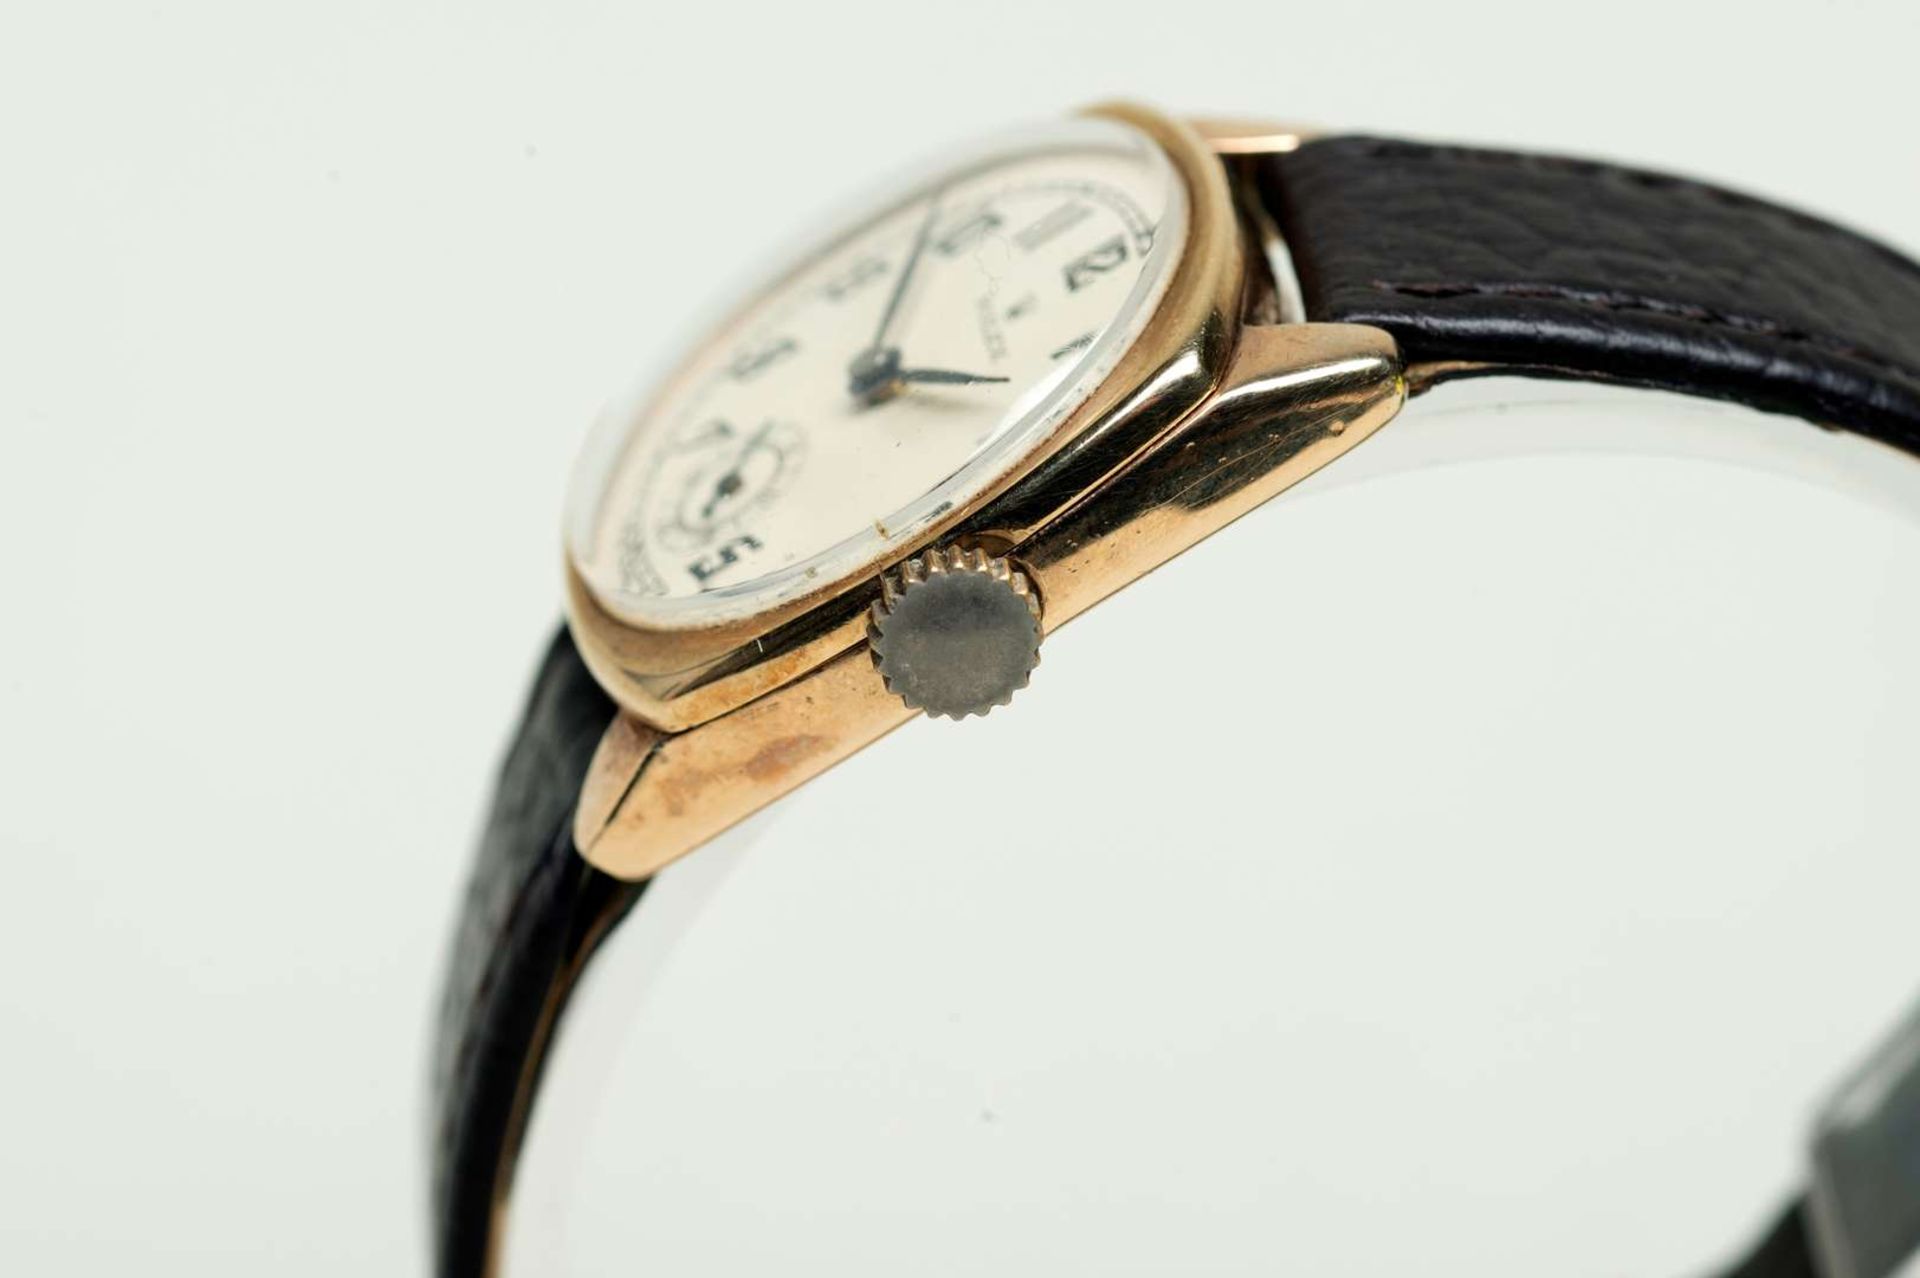 ROLEX, an early 20th century 9ct gold wristwatch - Image 2 of 7